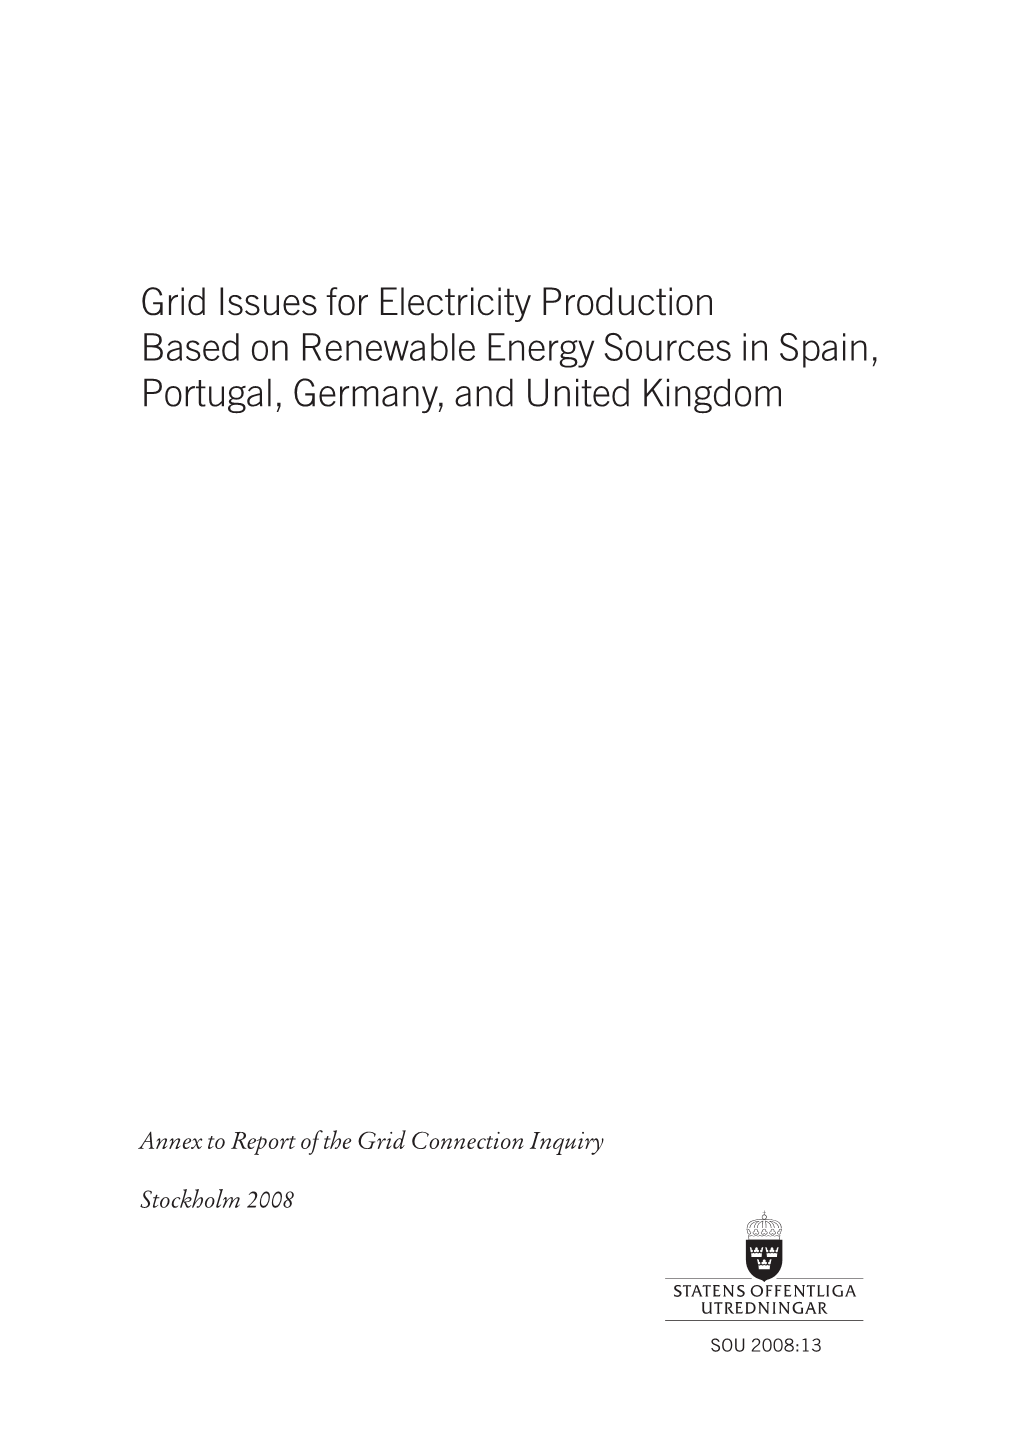 Grid Issues for Electricity Production Based on Renewable Energy Sources in Spain, Portugal, Germany and United Kingdom, SOU